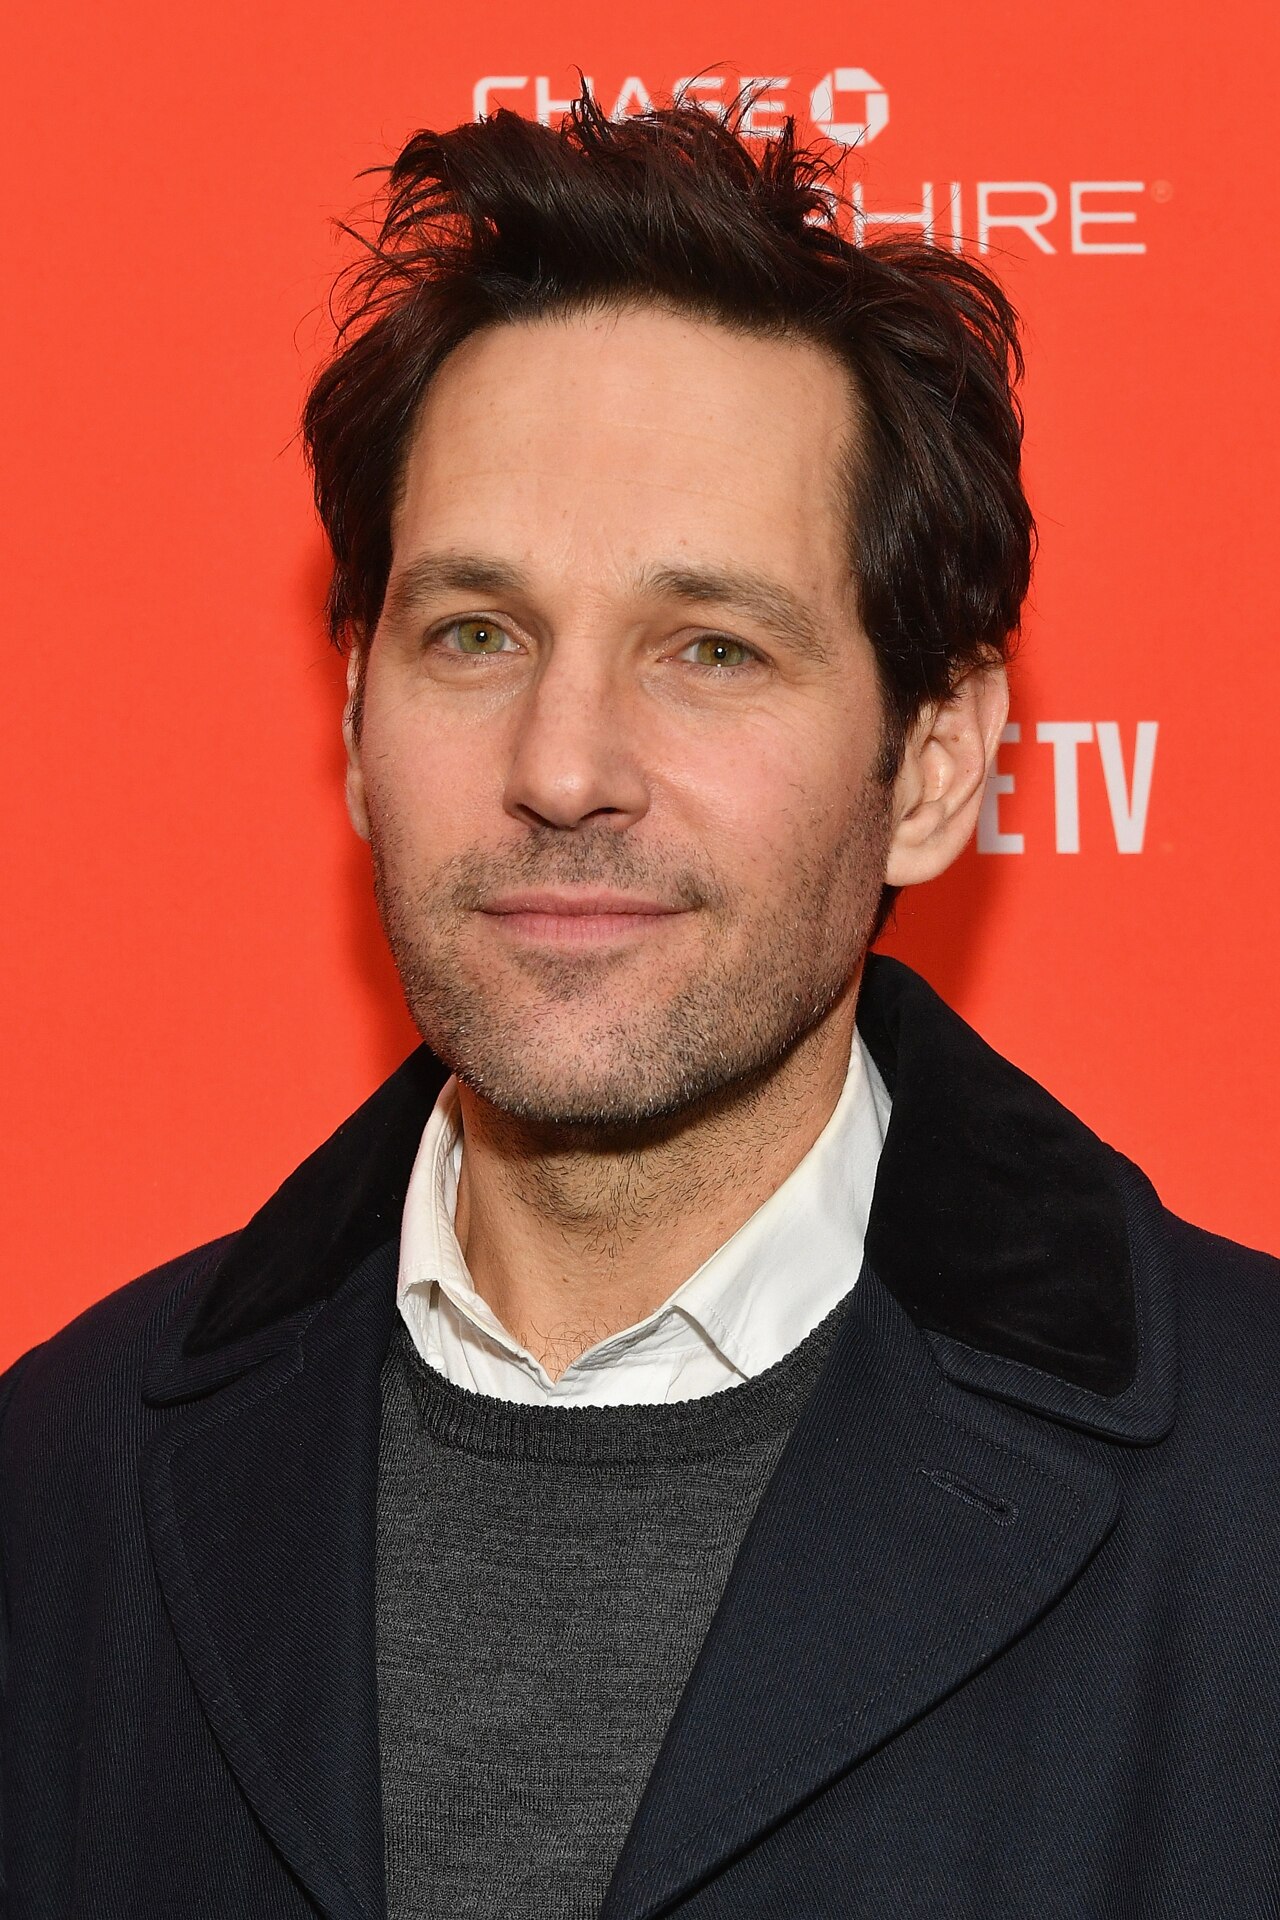 <h2>Paul Rudd</h2><p>Before he was Ant-Man in the Marvel superhero universe, Paul Rudd played FBI agent Ian Curtis in a Hong Kong sci-fi film called <a href="http://www.imdb.com/title/tt0251094/" target="_blank" rel="noopener"><i>Gen-Y Cops</i></a>—also known as <i>Gen-X Cops 2: Metal Mayhem</i>—which received a 35 per cent approval rating from audiences on Rotten Tomatoes. </p>